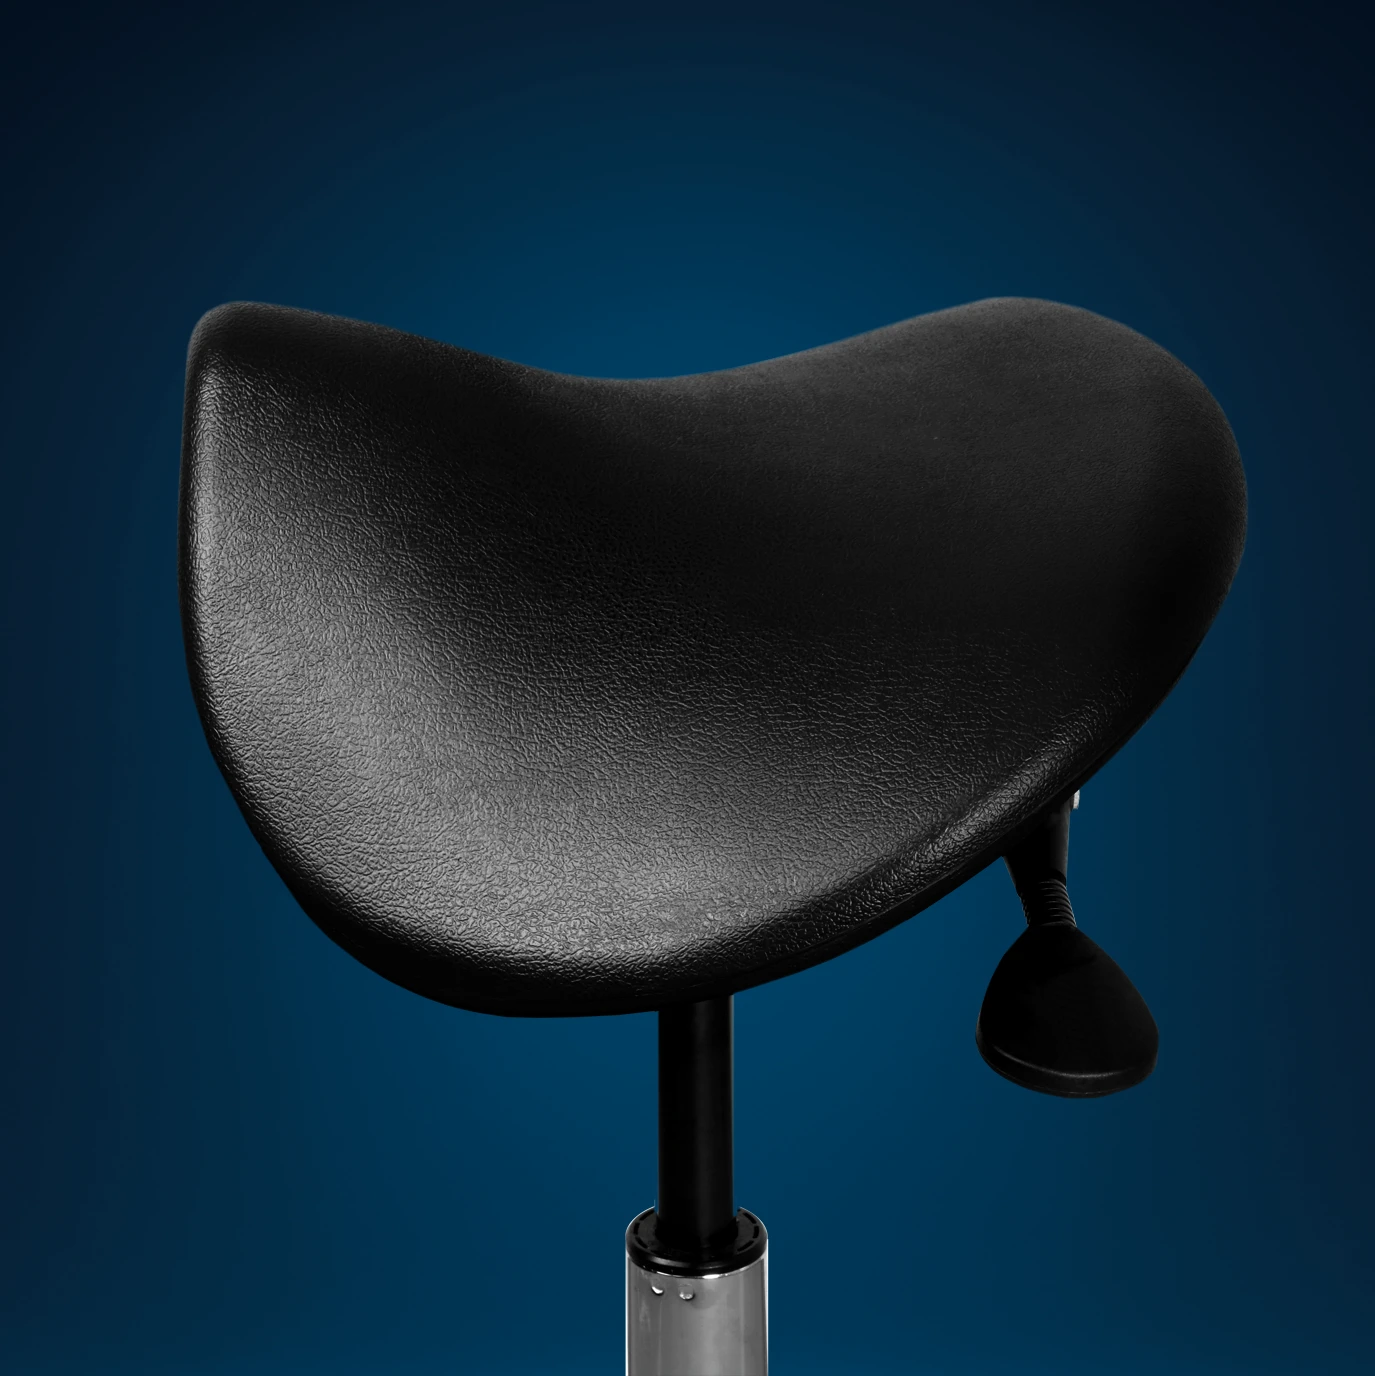 Seating stools, office chairs, wheeled chair, salon stool, office equipment, for gamers, office furniture